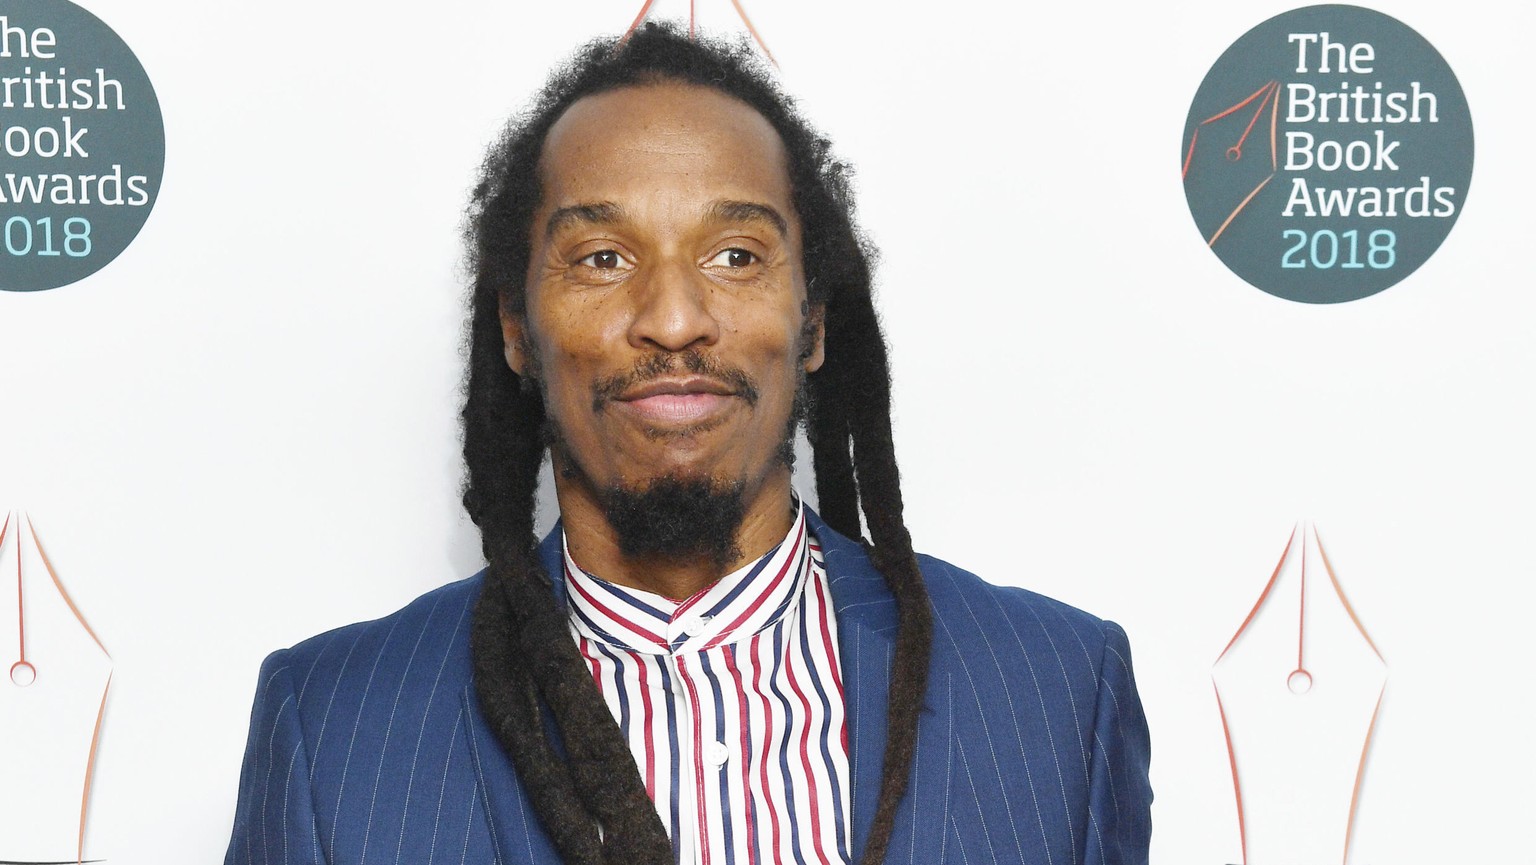 FILE - Benjamin Zephaniah arrives for the British Book Awards at the Grosvenor House Hotel in London, on May 14, 2018. Zephaniah, the British dub poet and political activist who drew huge inspiration  ...